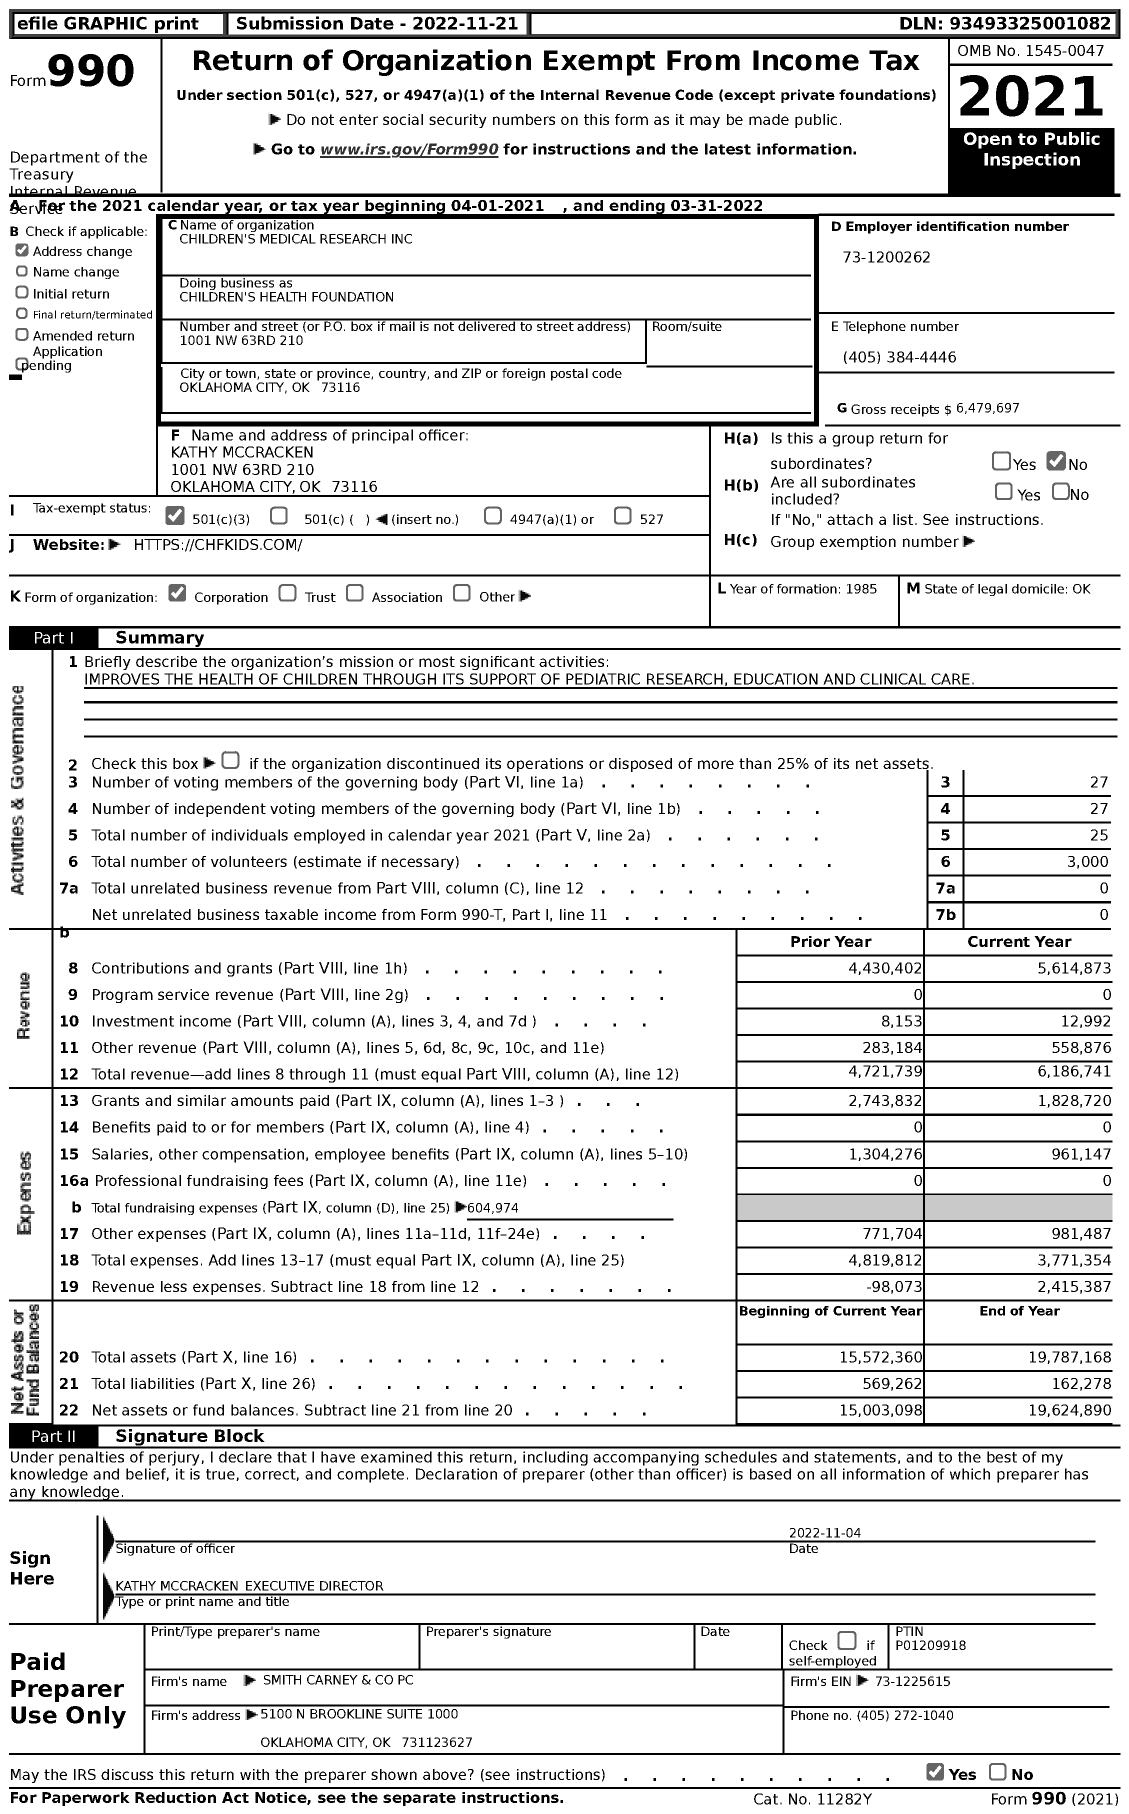 Image of first page of 2021 Form 990 for Children's Health Foundation / Children's Medical Research Inc